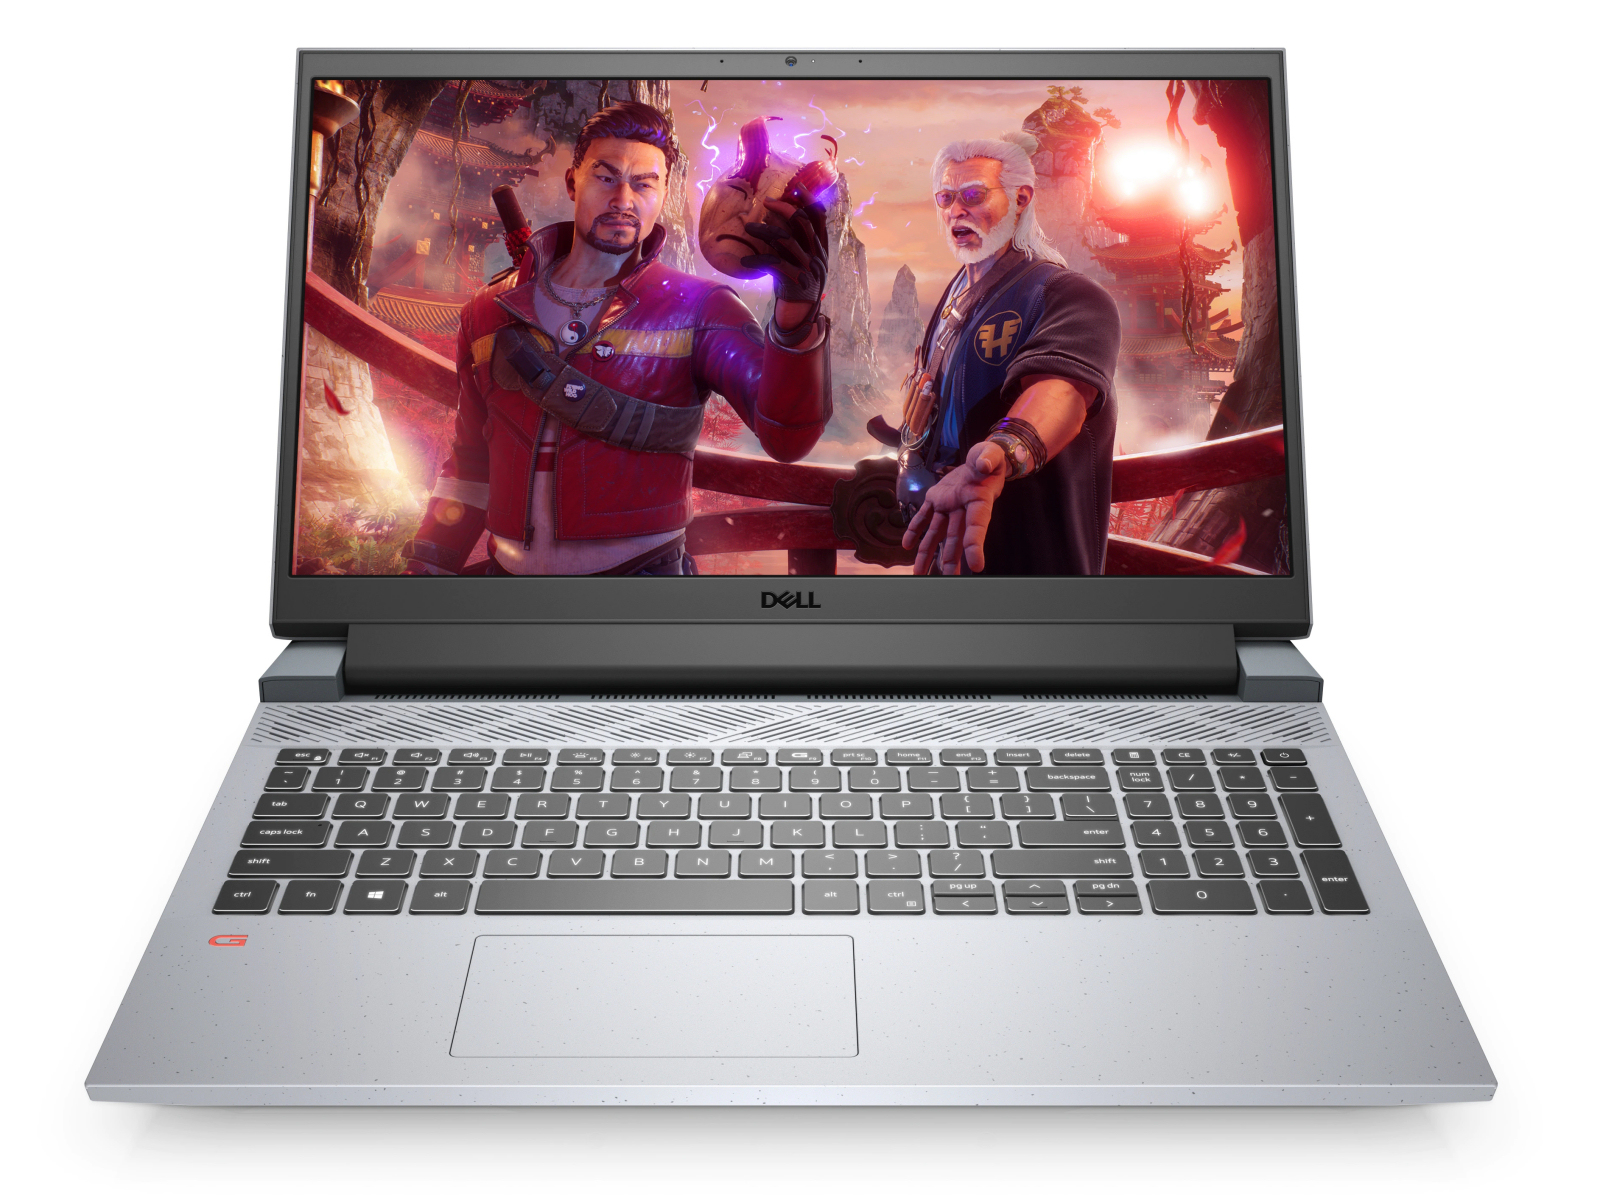 DELL G15 Review - The More Affordable Alienware! 